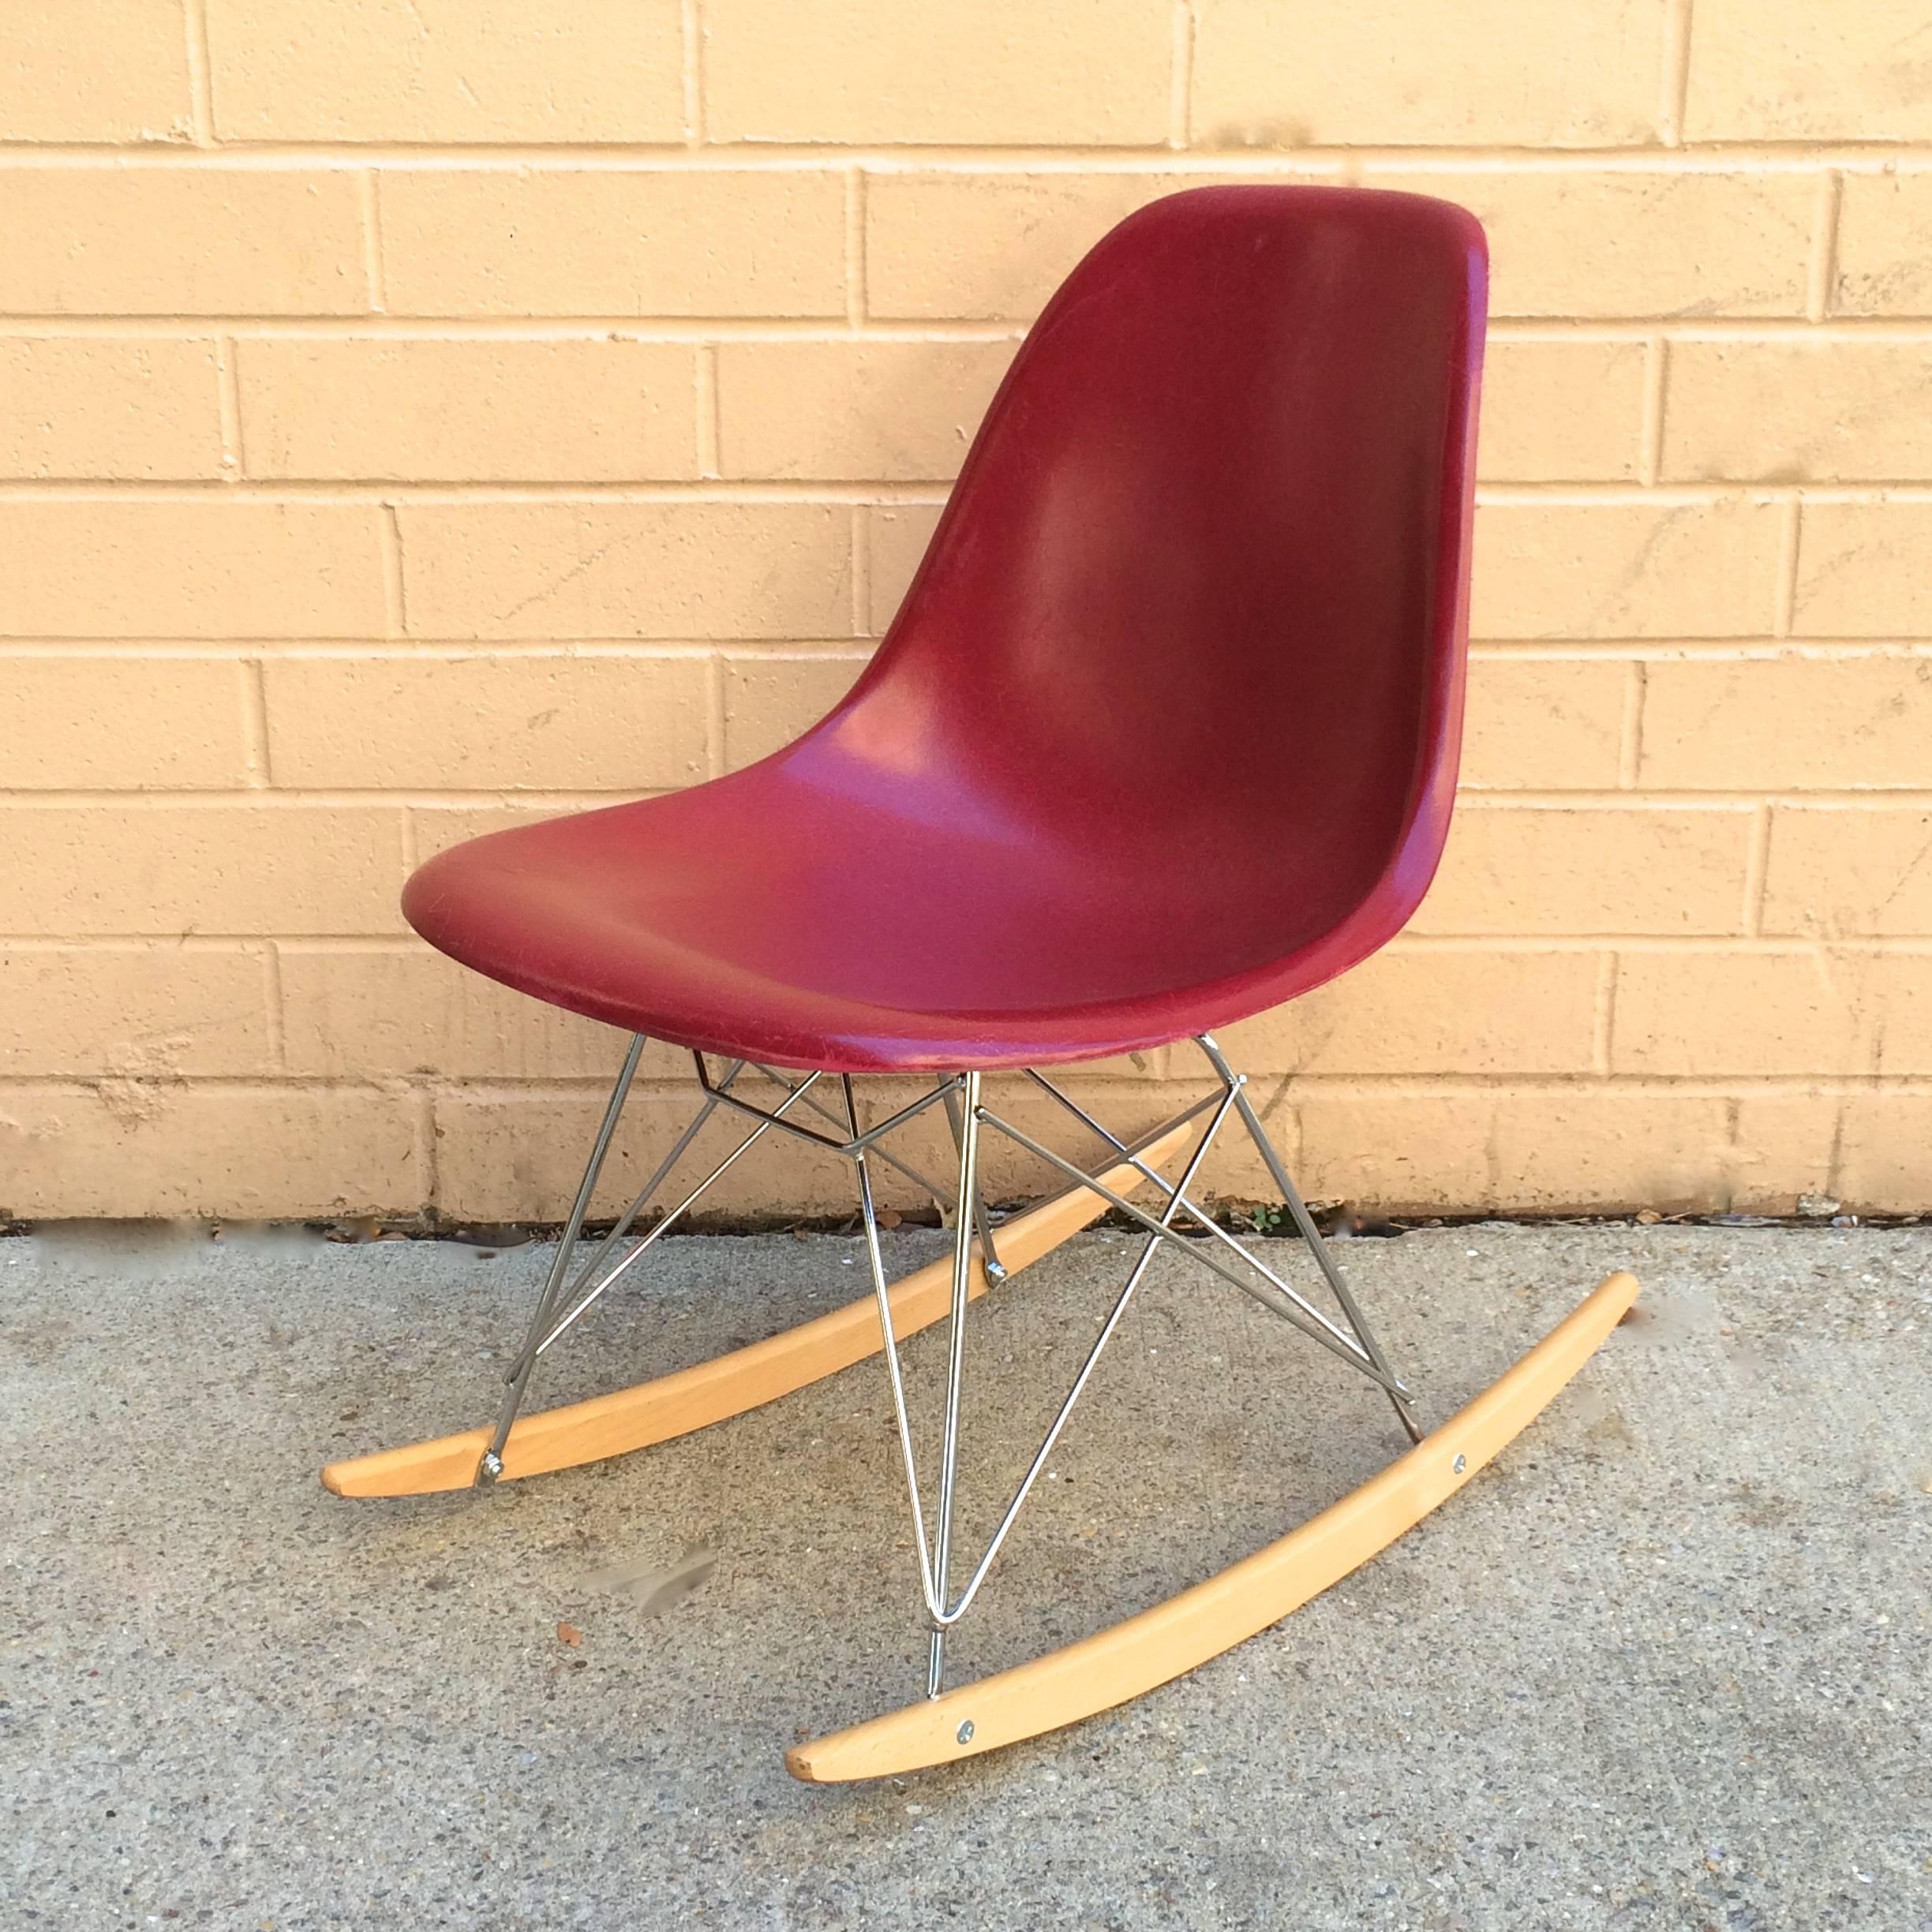 Herman Miller Eames fiberglass shell in Magenta. Shell is New Old Stock, that is, it is vintage but has never been used. Likely a custom color. I have been unable to find this color in any Herman Miller sales catalogs. Unlike any other color I have